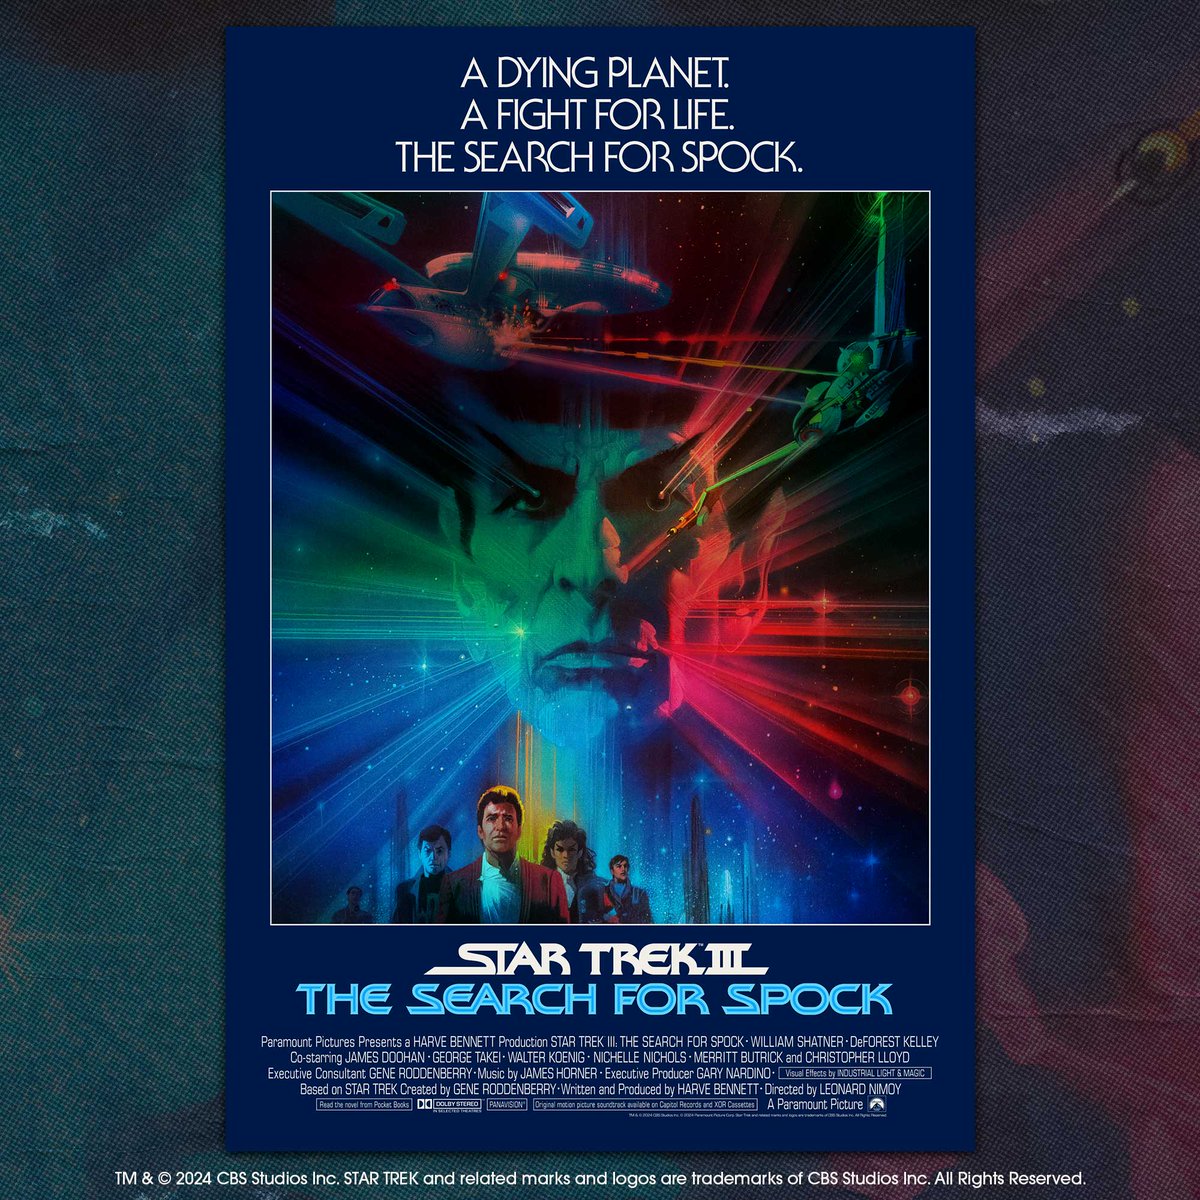 To celebrate the 40th anniversary of Star Trek III: The Search For Spock, this Thursday we are releasing Bob Peak's original theatrical artwork as a fully remastered, limited edition fine art poster set - More info vice-press.com/blogs/news/sta…